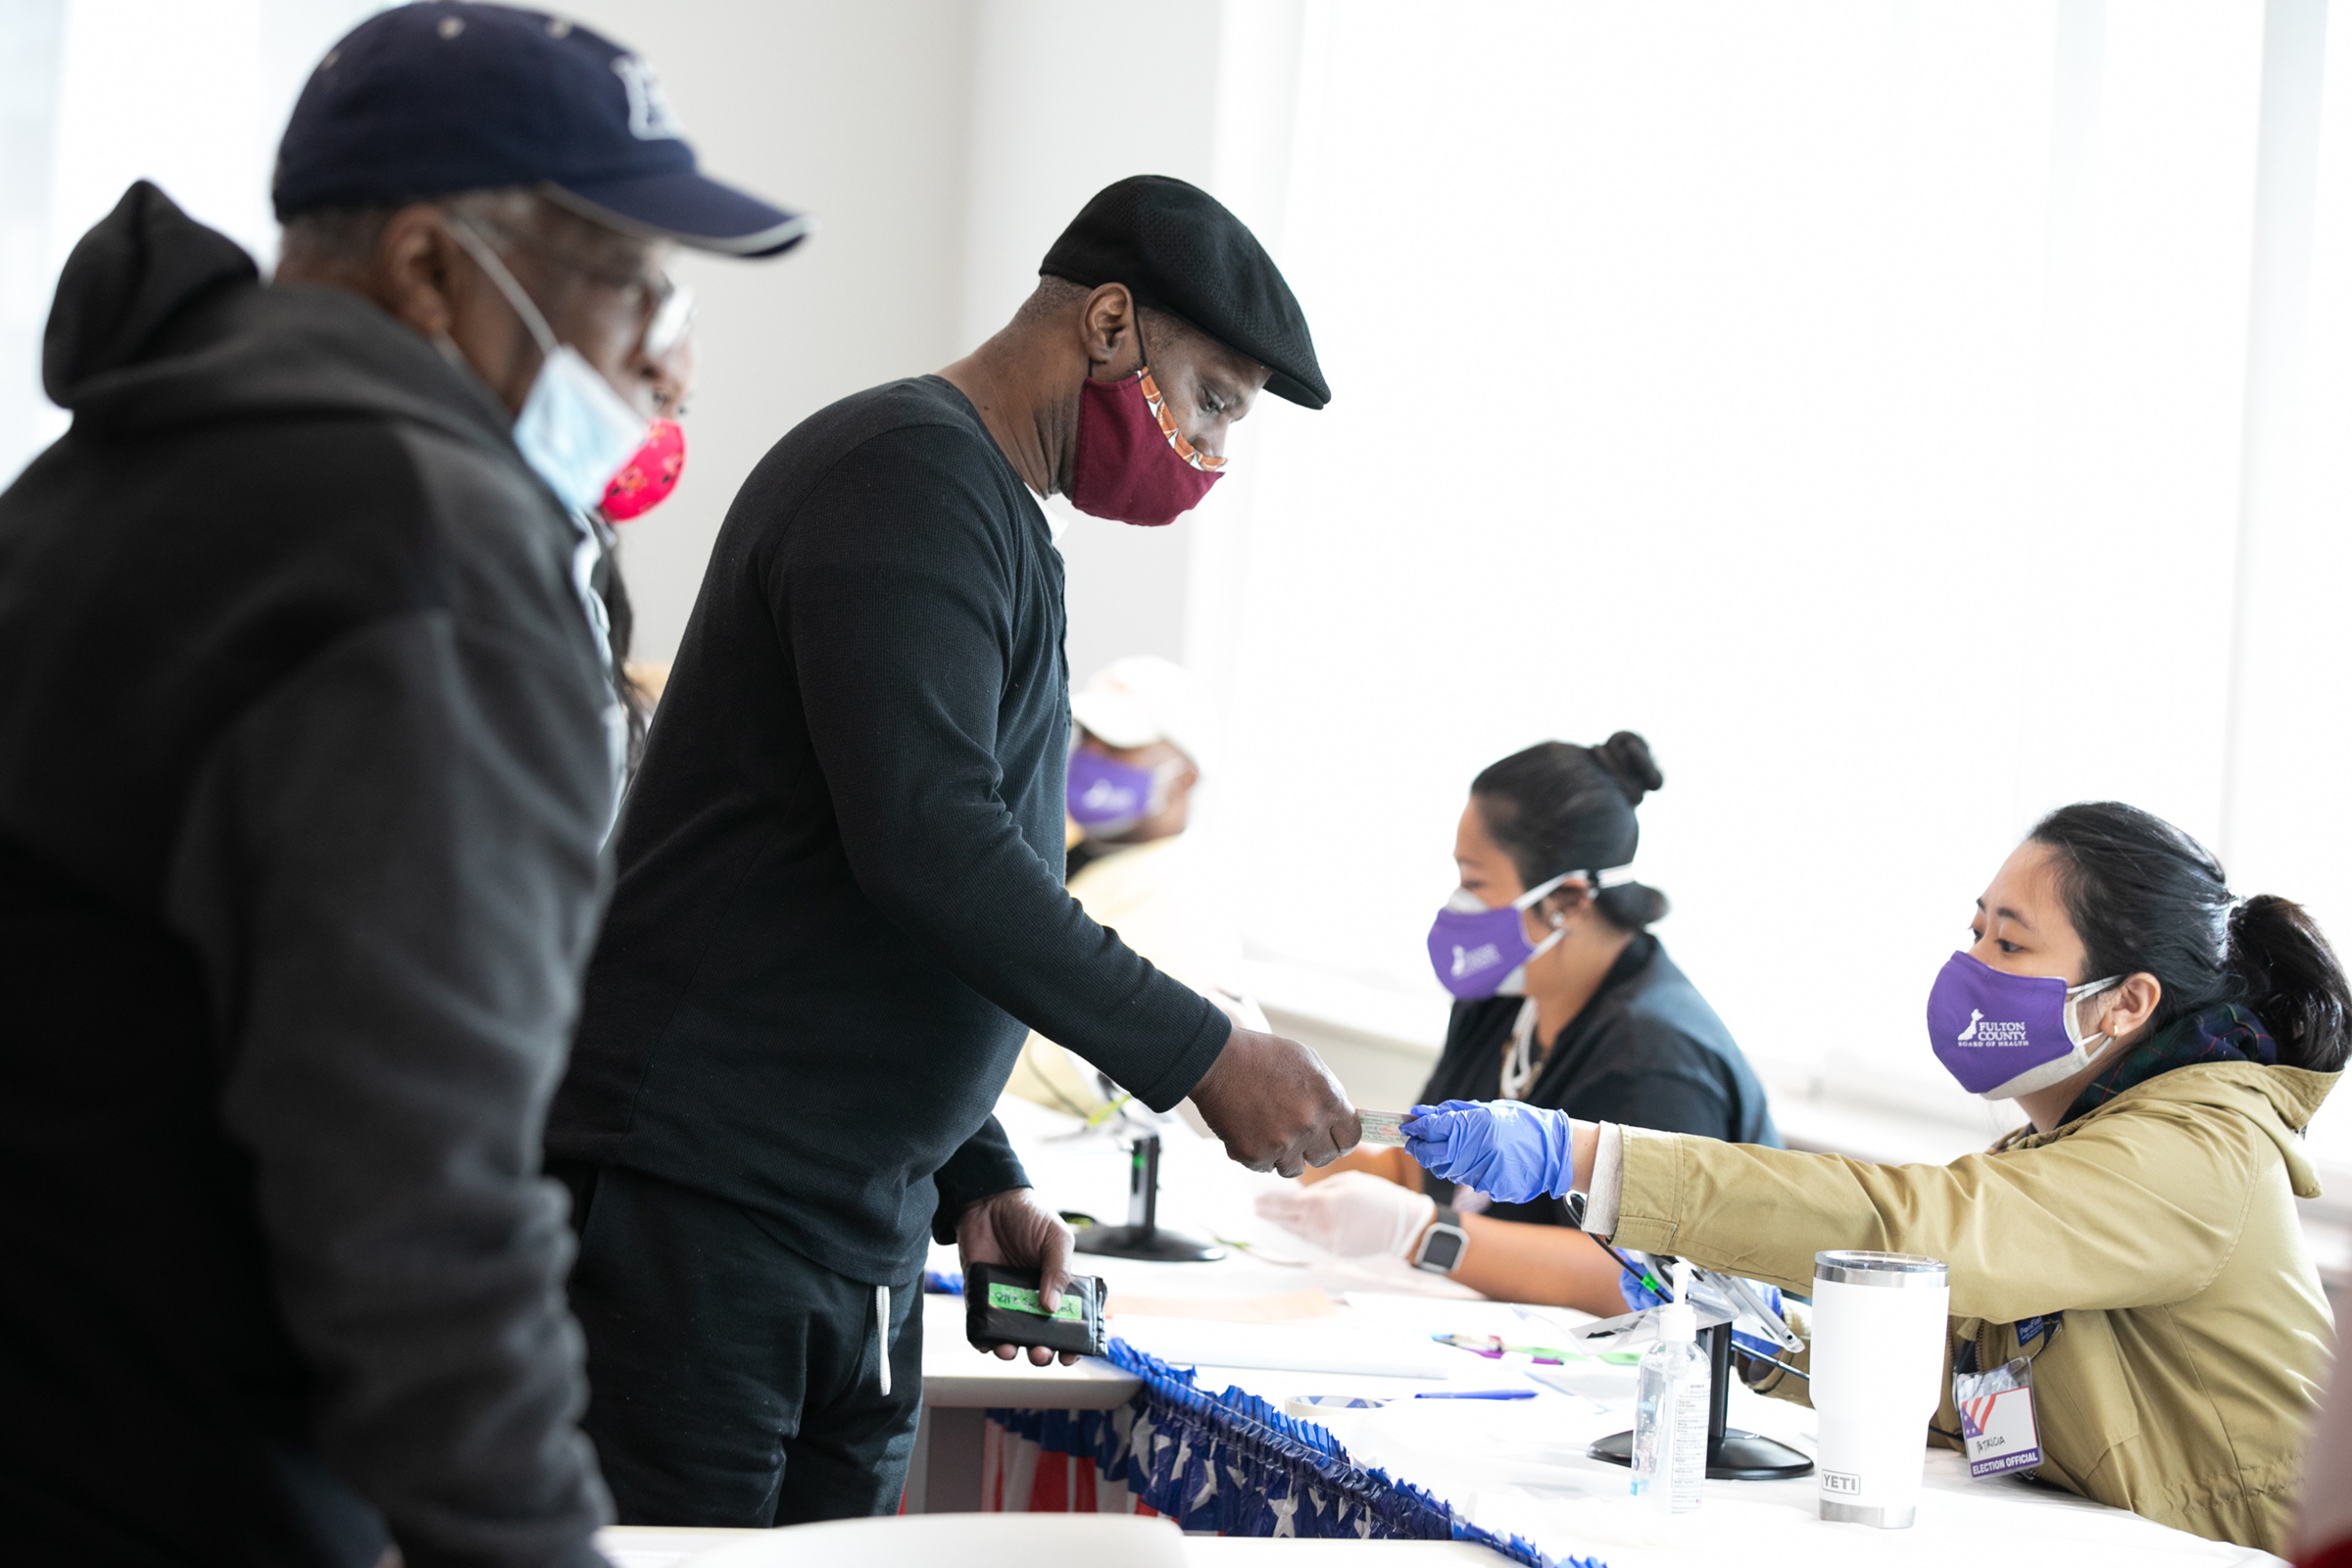 Voters check-in with poll workers to cast their ballots in Atlanta on Nov. 3, 2020. (Jessica McGowan—Getty Images)